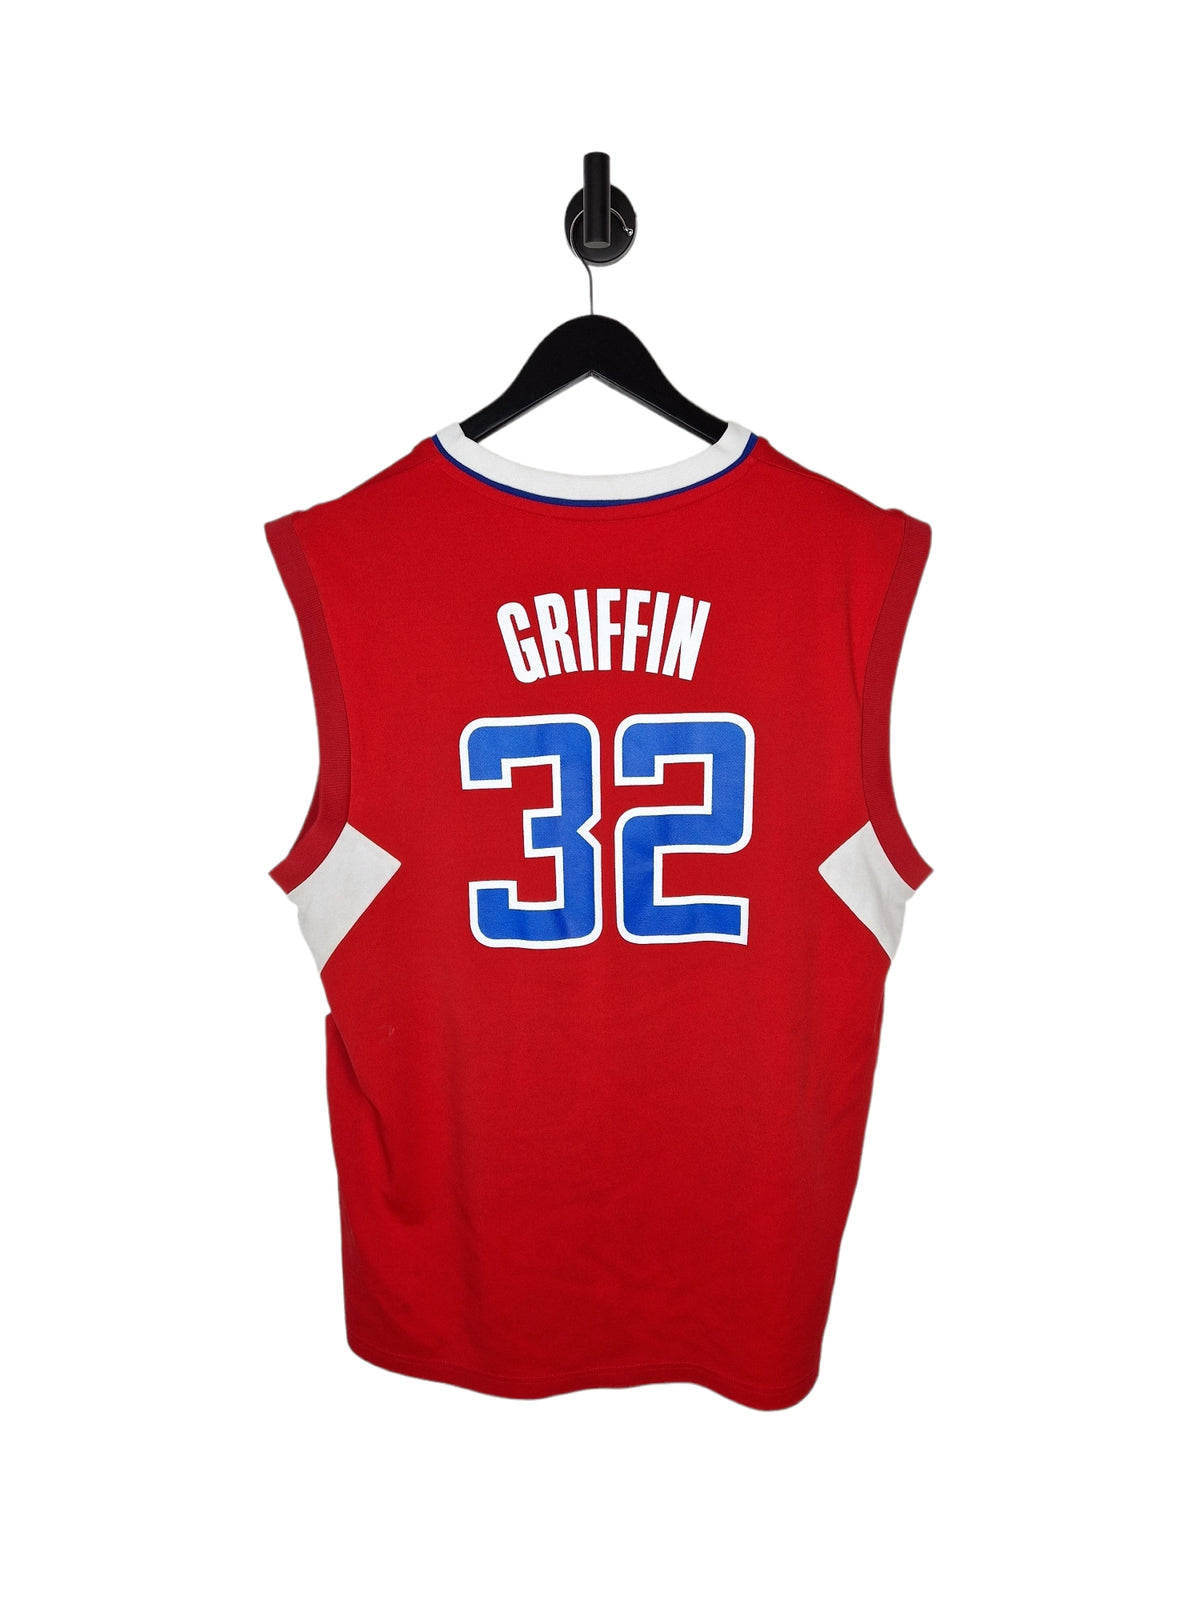 Adidas Los Angeles Clippers Griffin 23 Basketball Jersey - Size Large